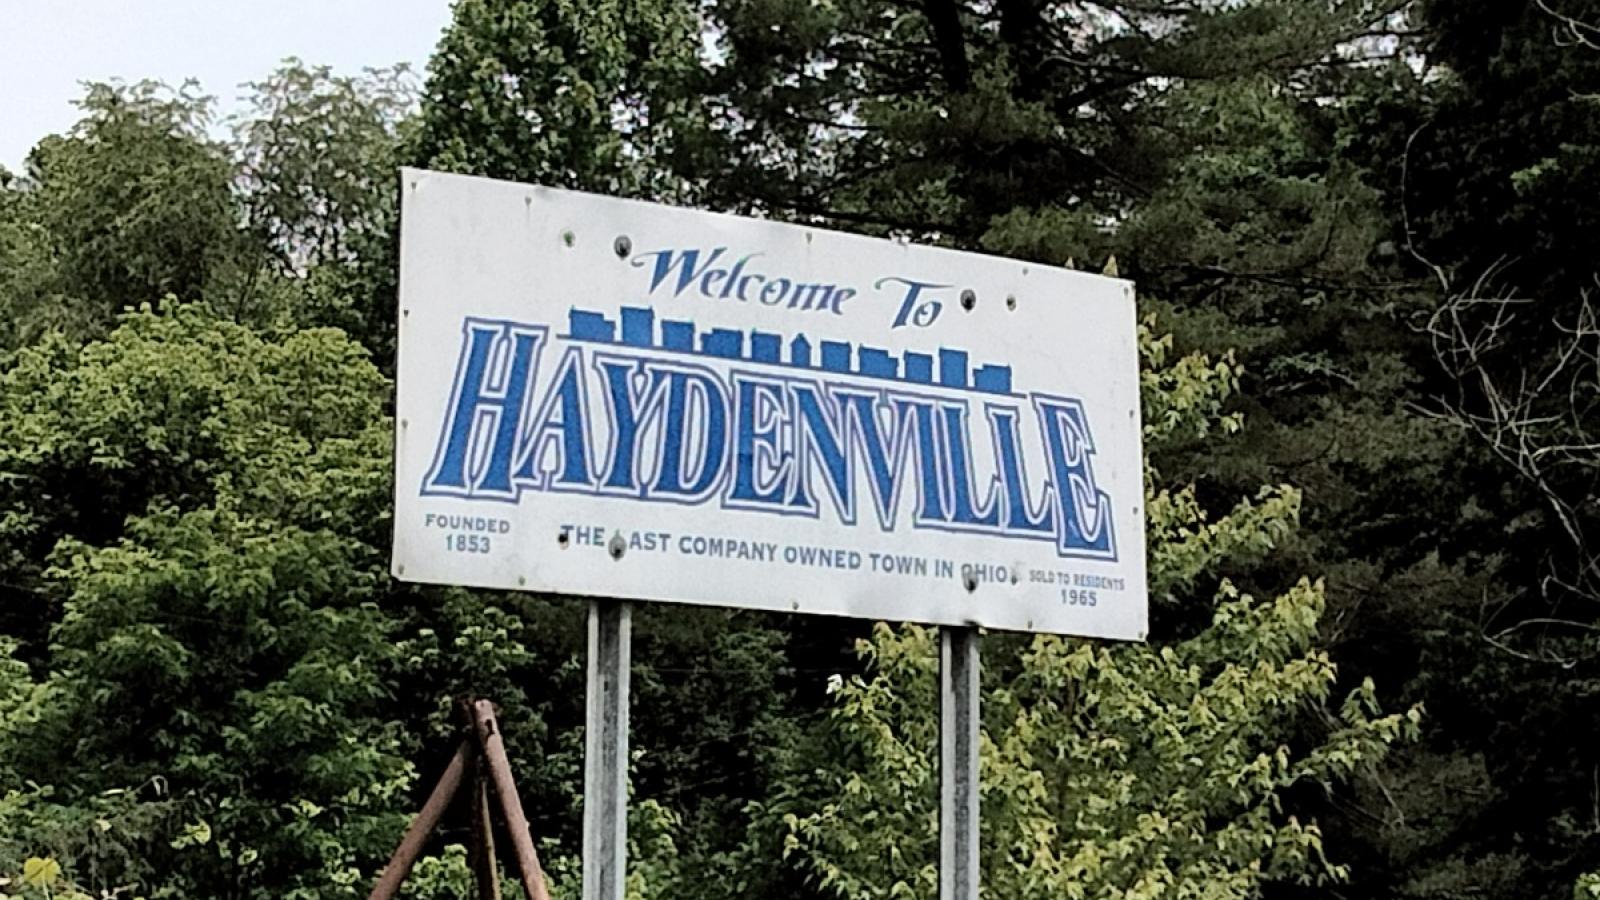 A sign saying "Welcome to Haydenville: the last company owned town in Ohio." The lettering is in blue against a white background, and the founding (1853) and selling (1965) dates of the town are located at the bottom of the sign. The sign stands high up, against a group of trees.